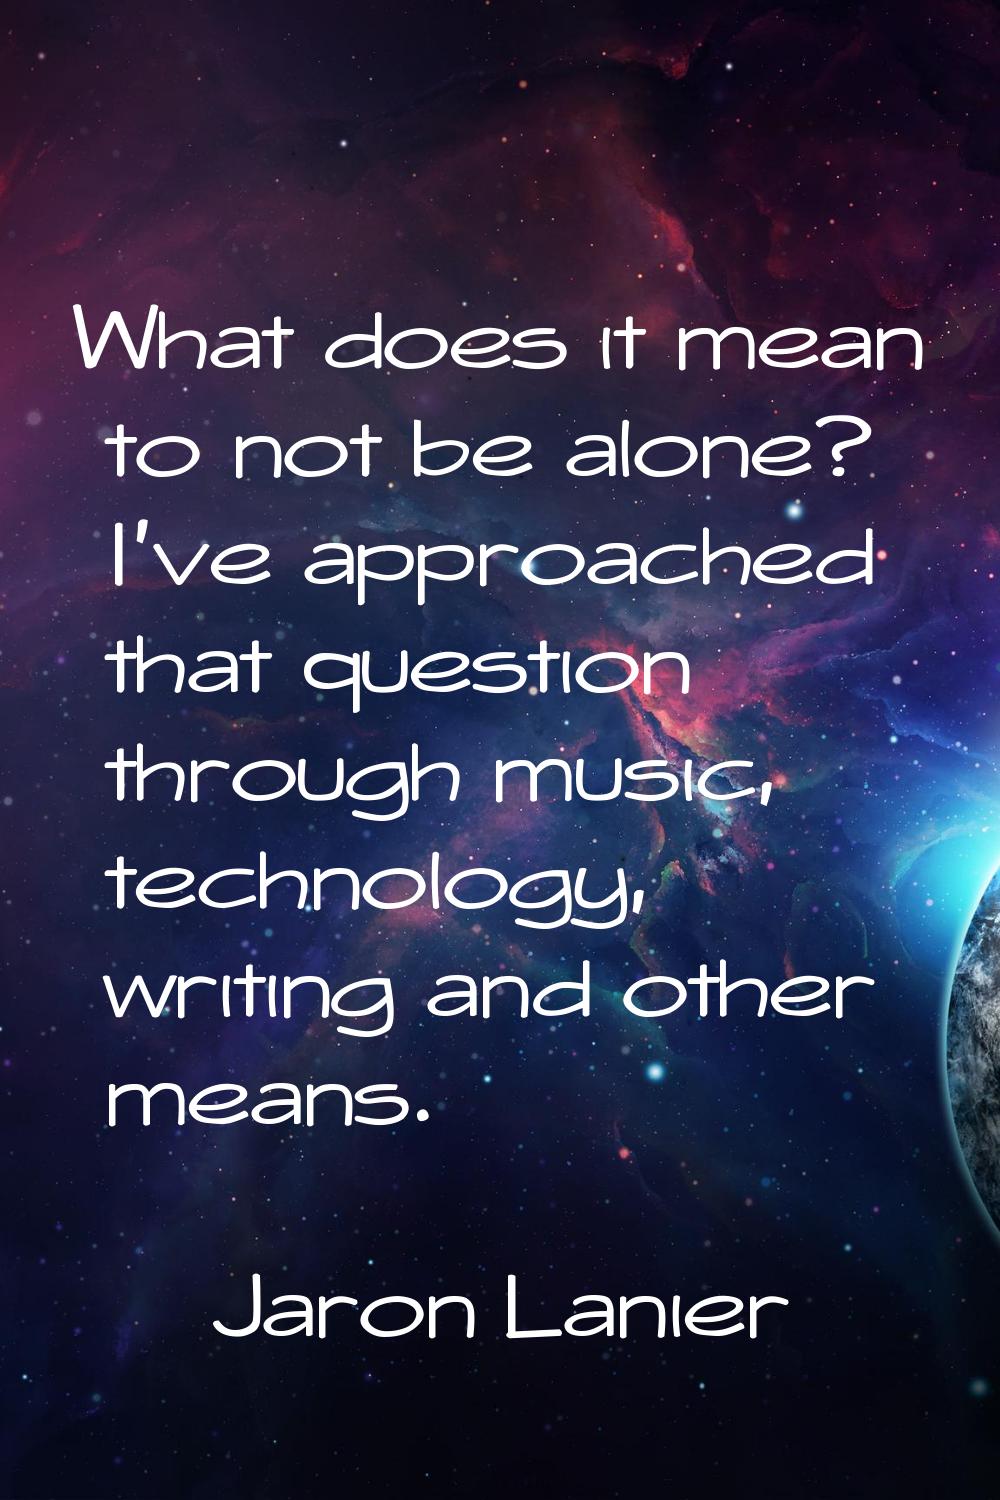 What does it mean to not be alone? I've approached that question through music, technology, writing